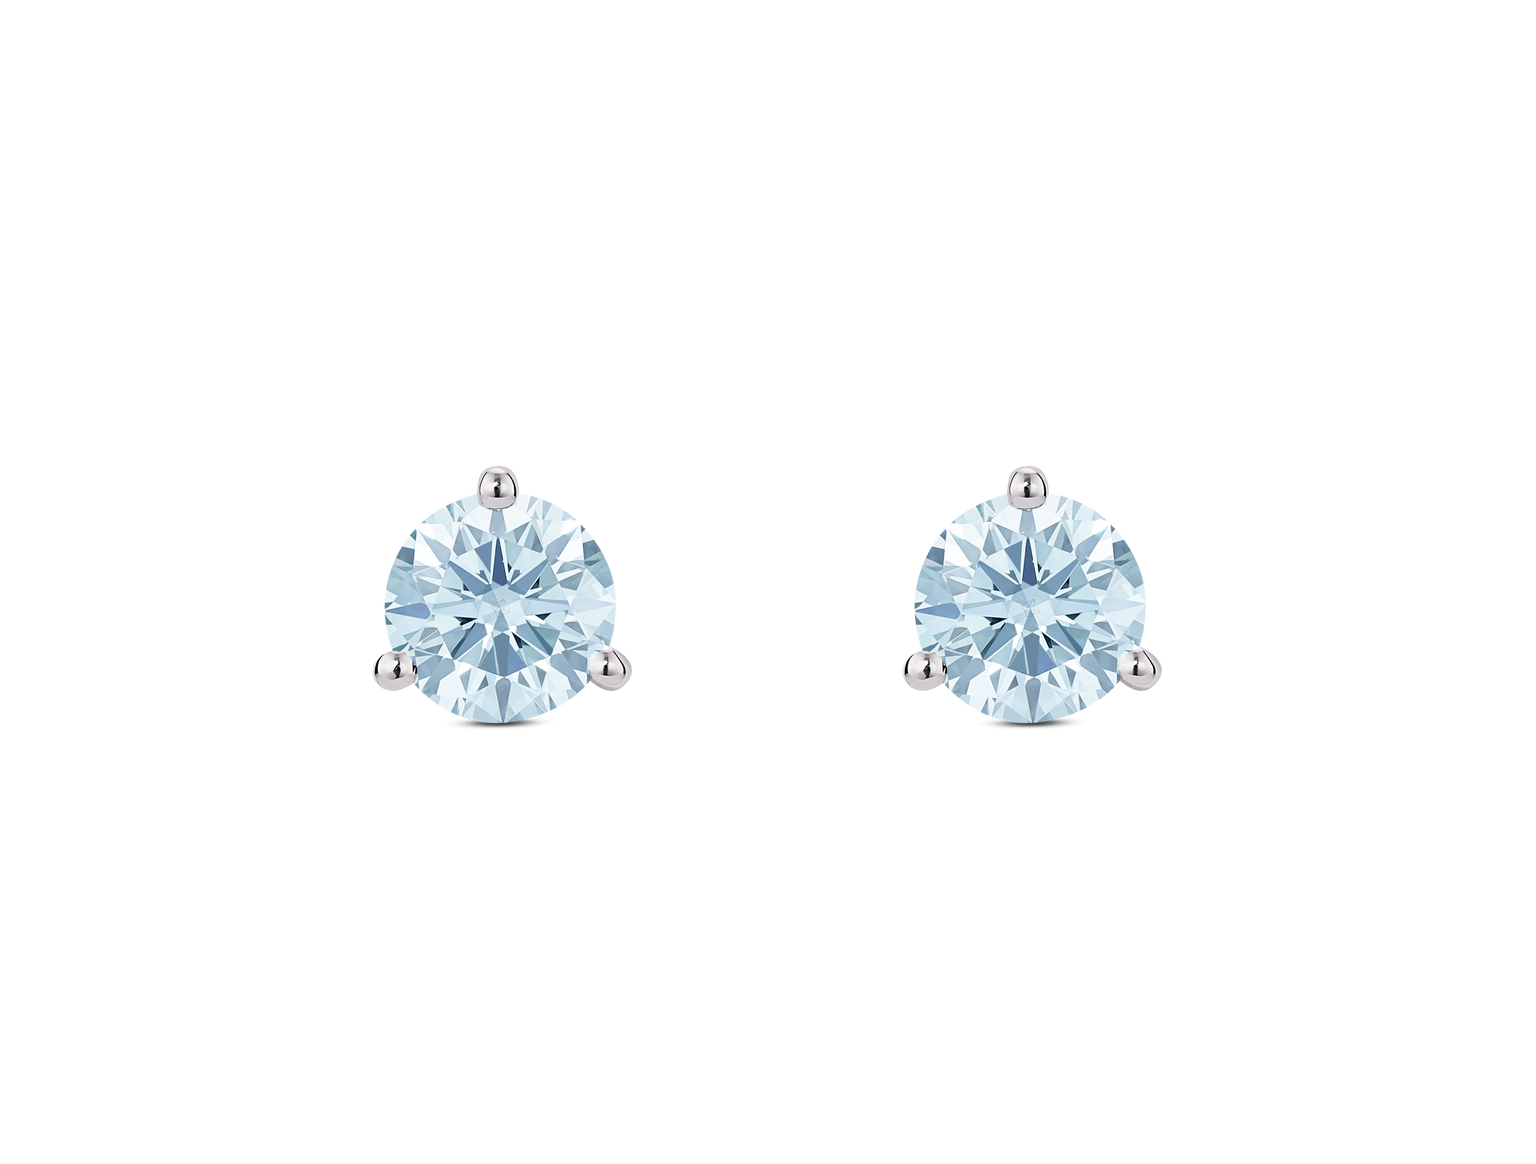 Front view of blue 1 carat solitaire studs in 14k white gold